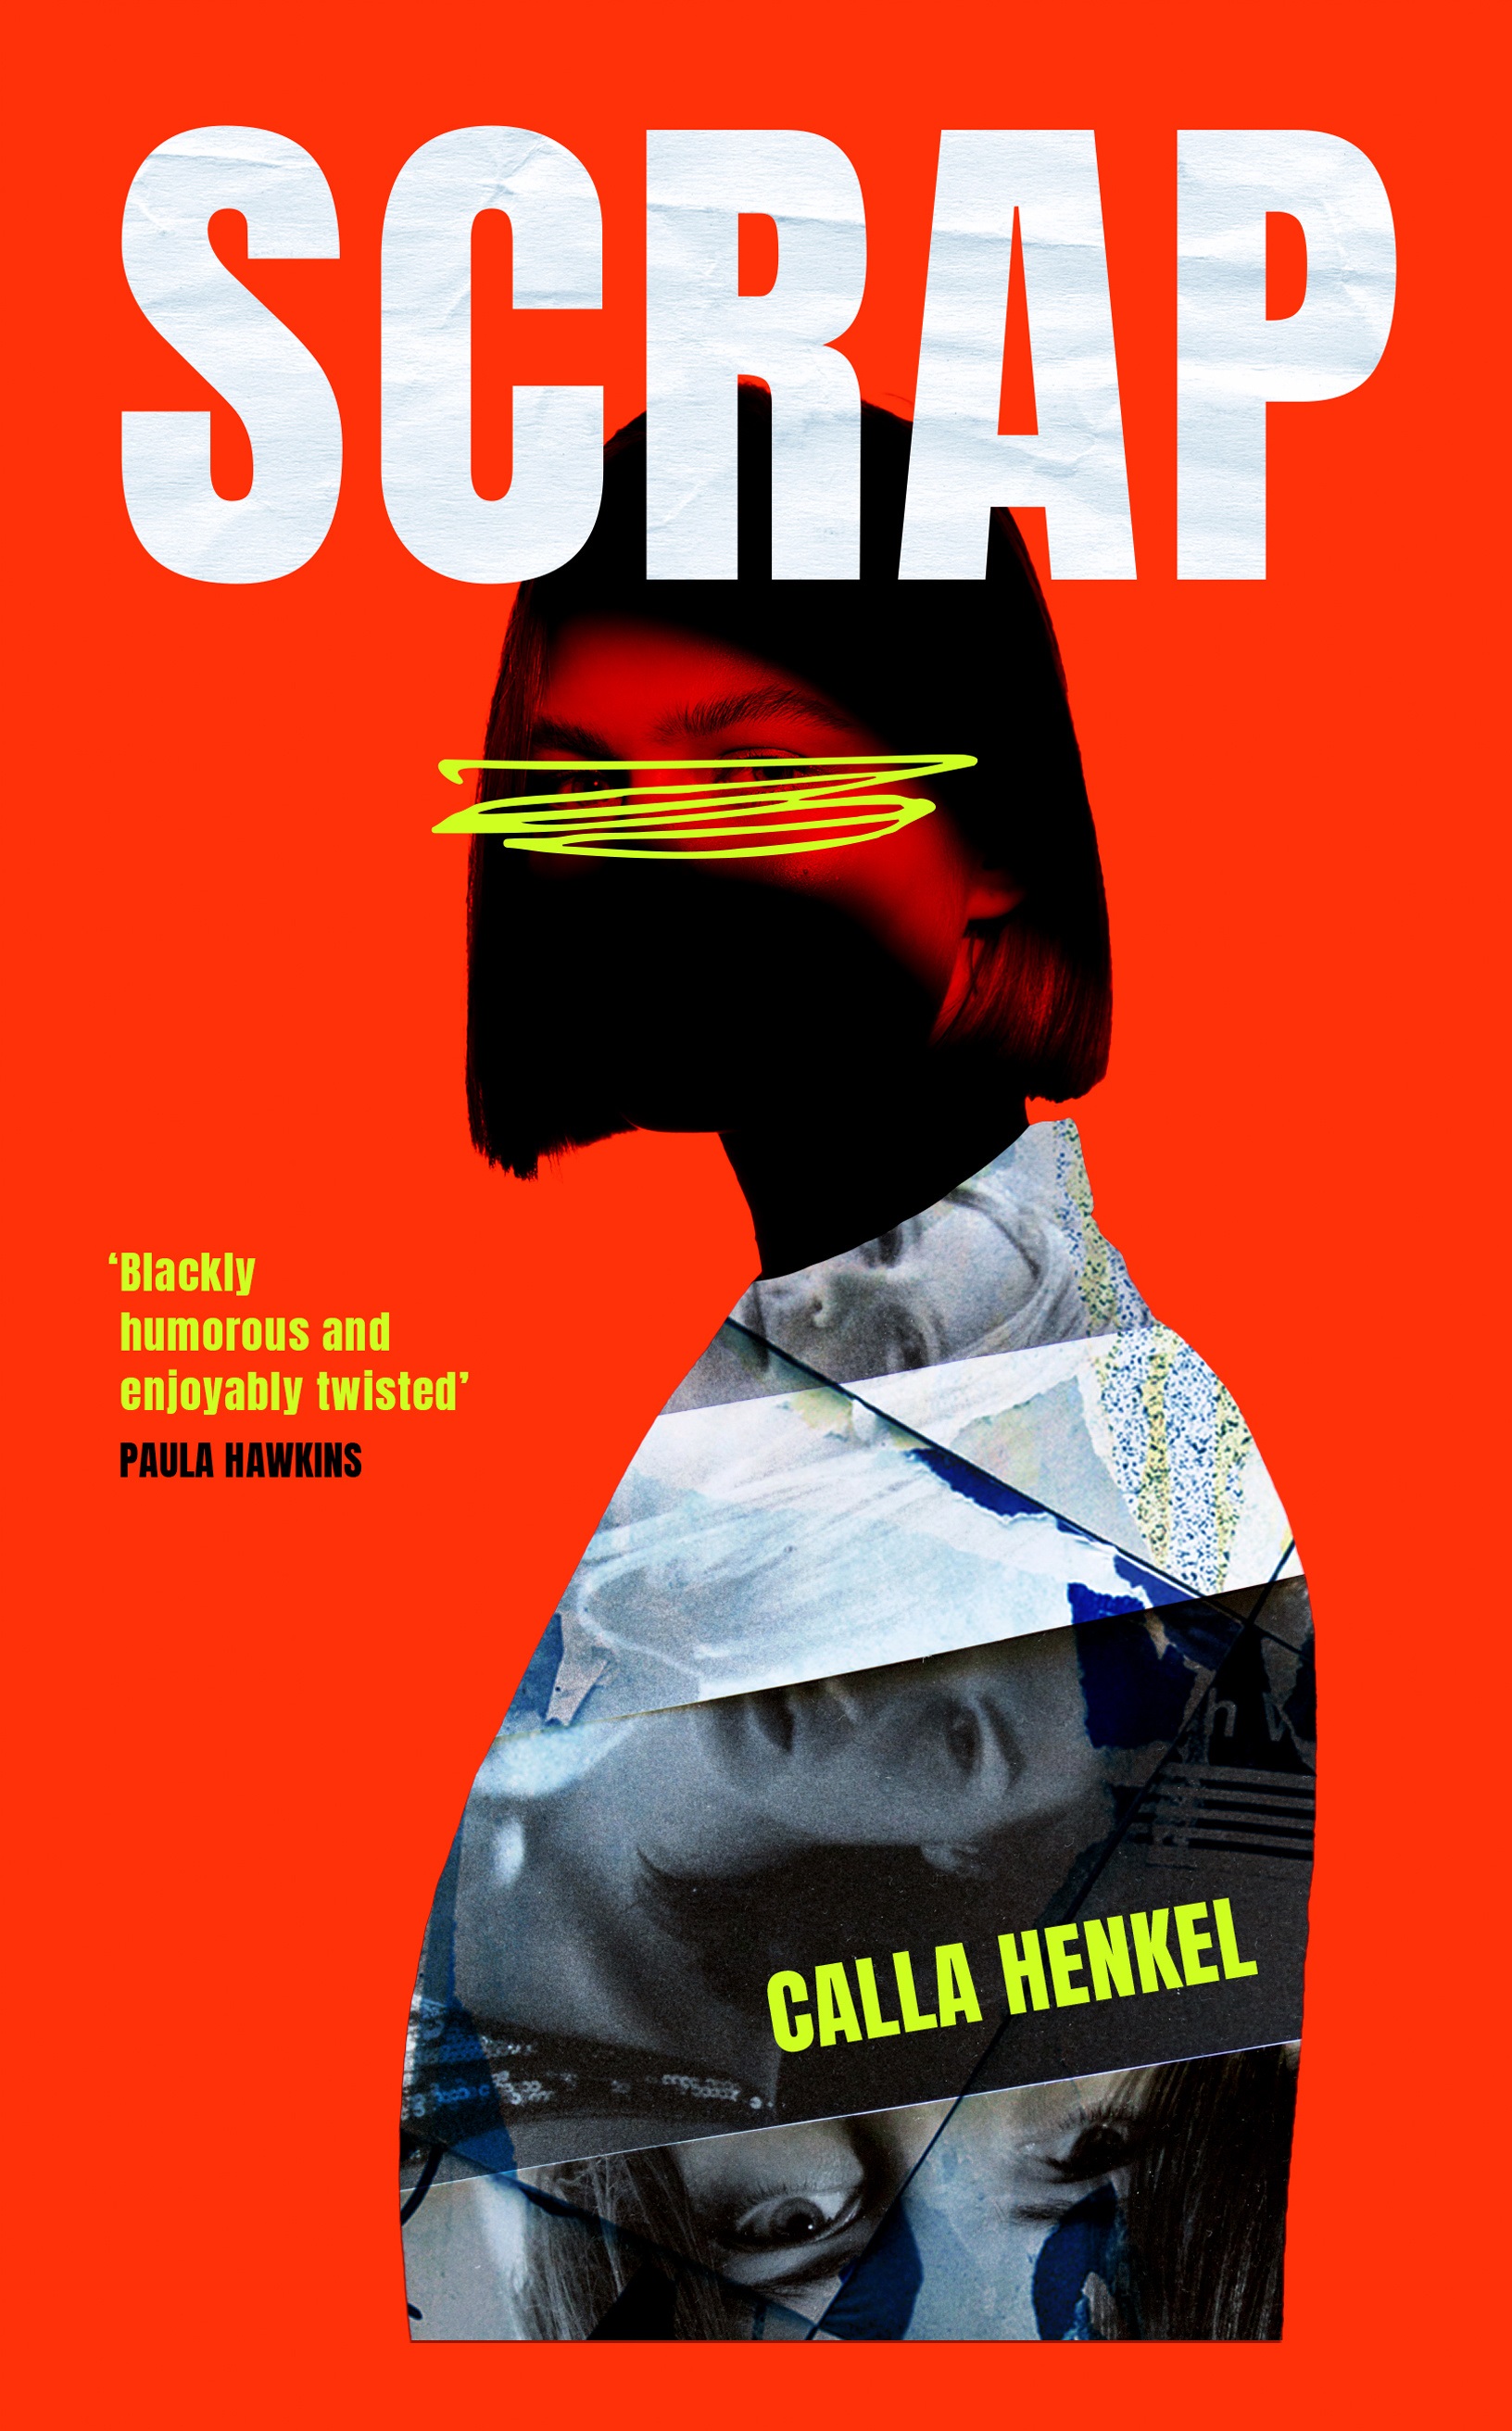 A book cover showing a stylised graphic of a woman with sharp bobbed hair on a red background